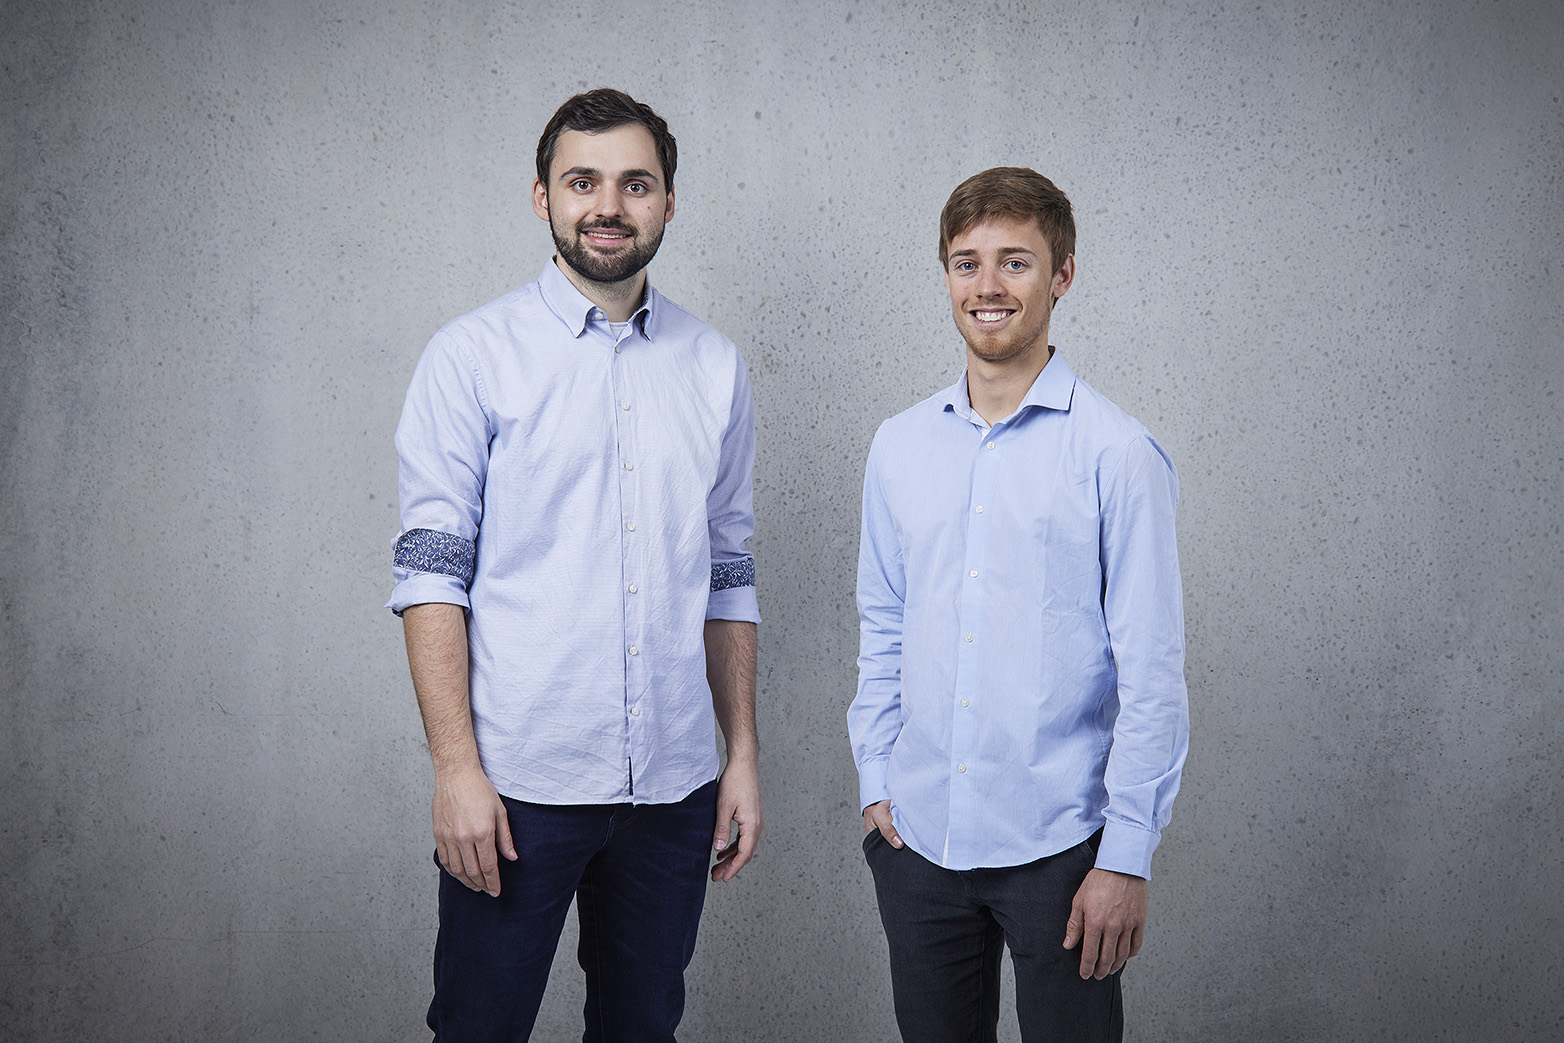 From left to right: Aurel Neff, Mechanical Engineering / Patrick Barton, Robotics, Systems and Control (Source: Caterra)